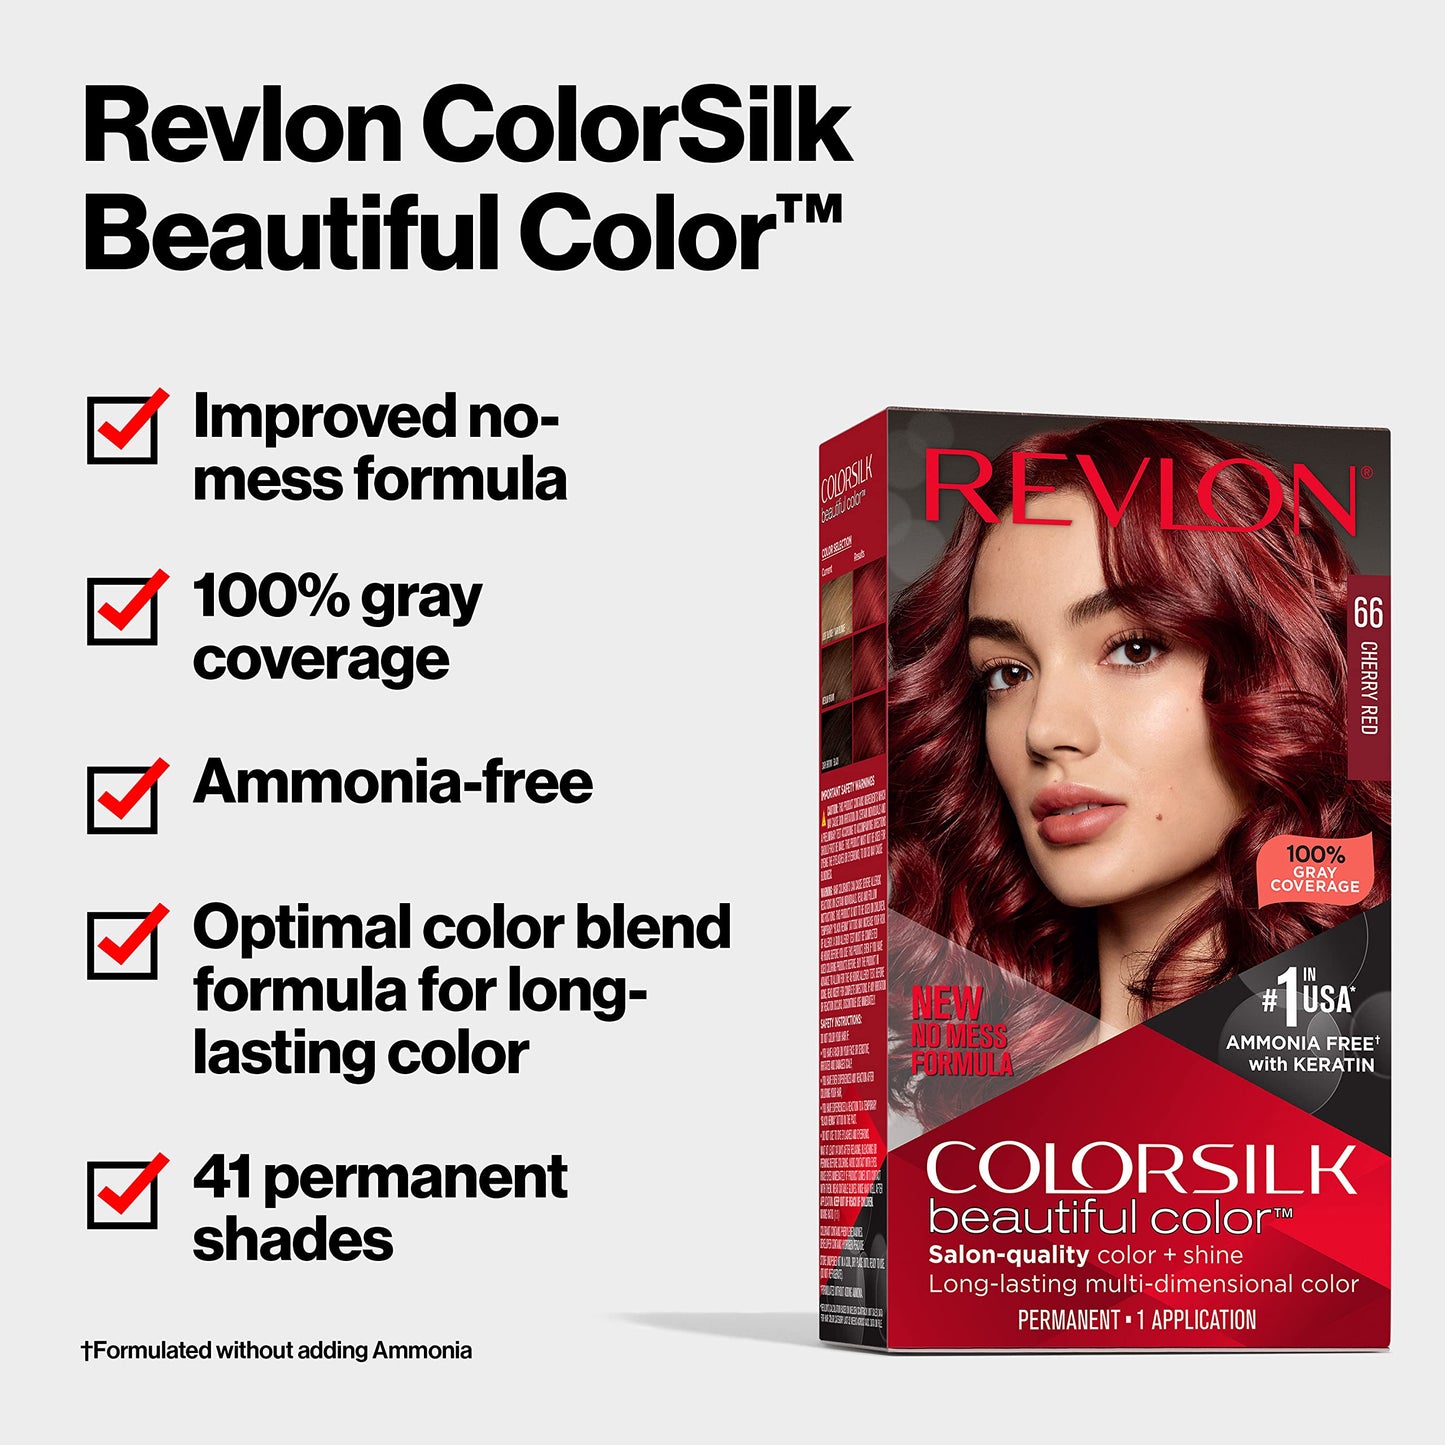 Revlon Colorsilk Beautiful Color Permanent Hair Color, Long-Lasting High-Definition Color, Shine & Silky Softness with 100% Gray Coverage, Ammonia Free, 060 Dark Ash Blonde, 1 Pack